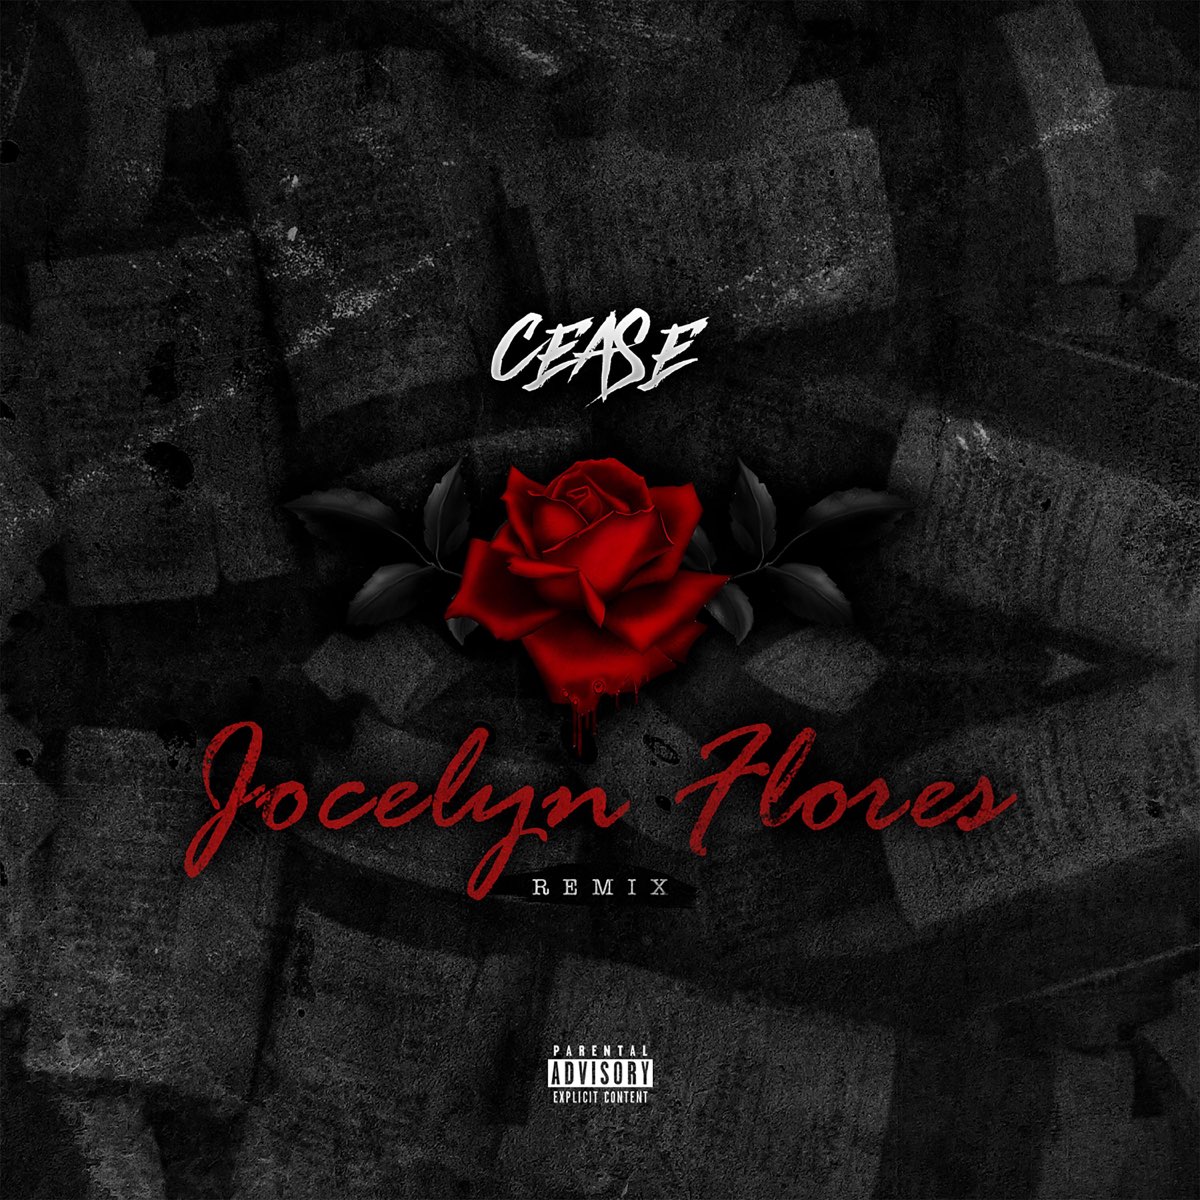 Jocelyn Flores (Remix) - Single by Cease on Apple Music